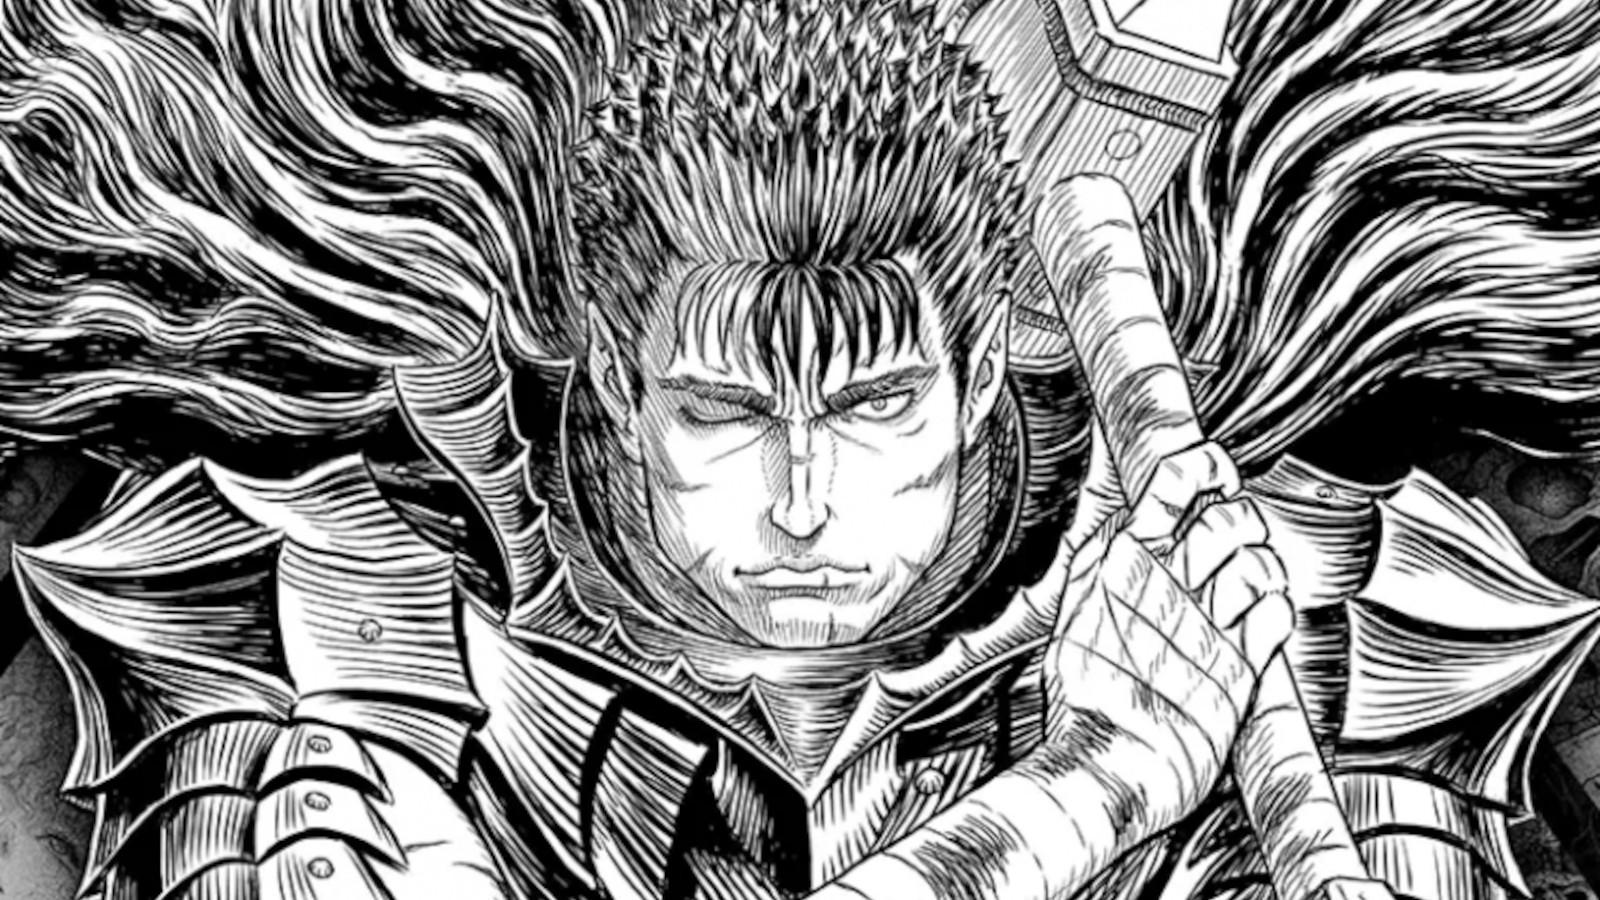 Get 13 Berserk Deluxe Edition mangas for a ridiculously low price